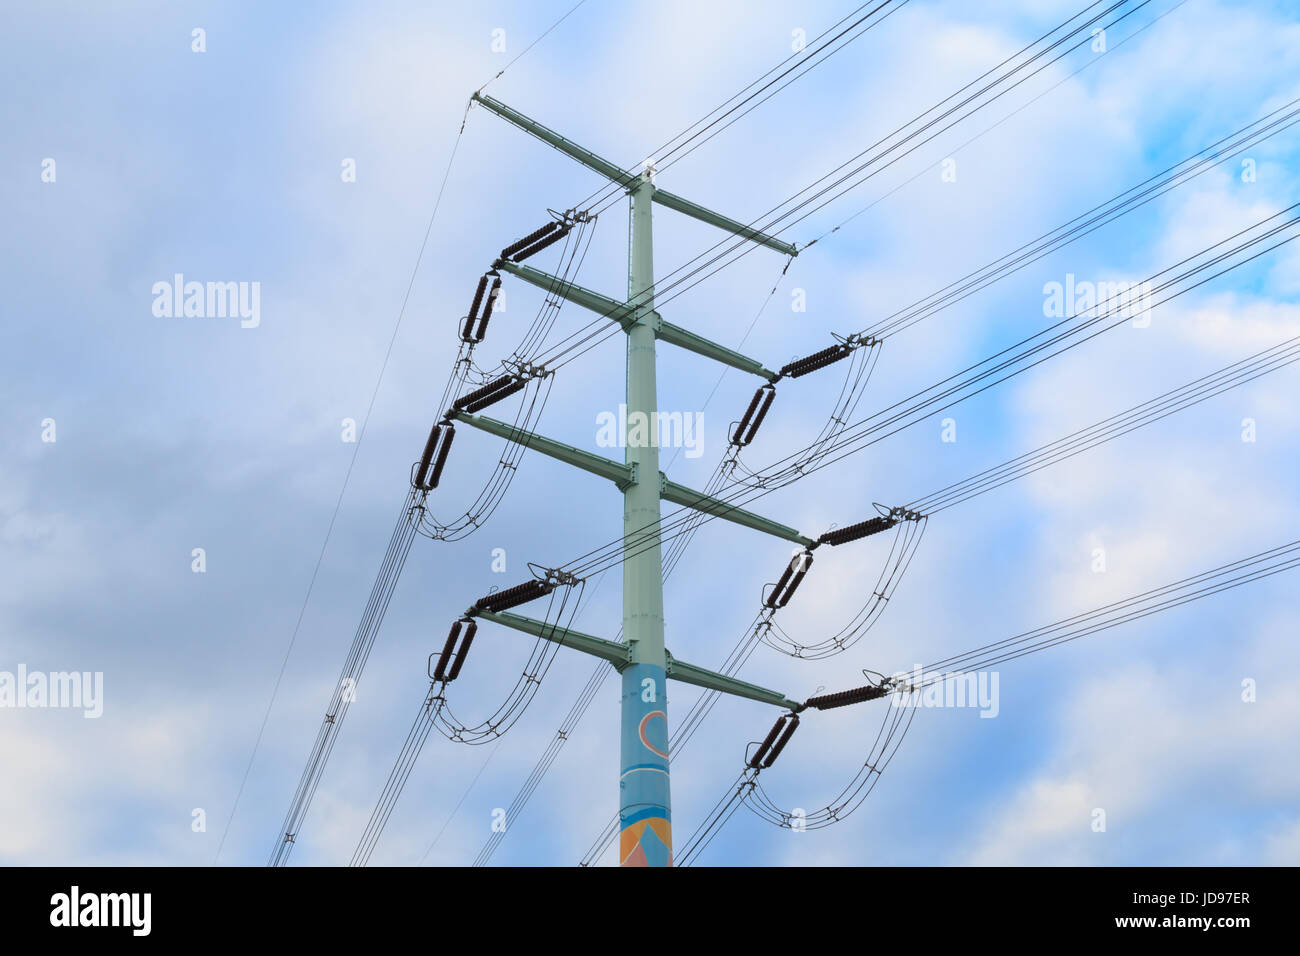 Utility poles supporting wires for various public utilities Stock Photo